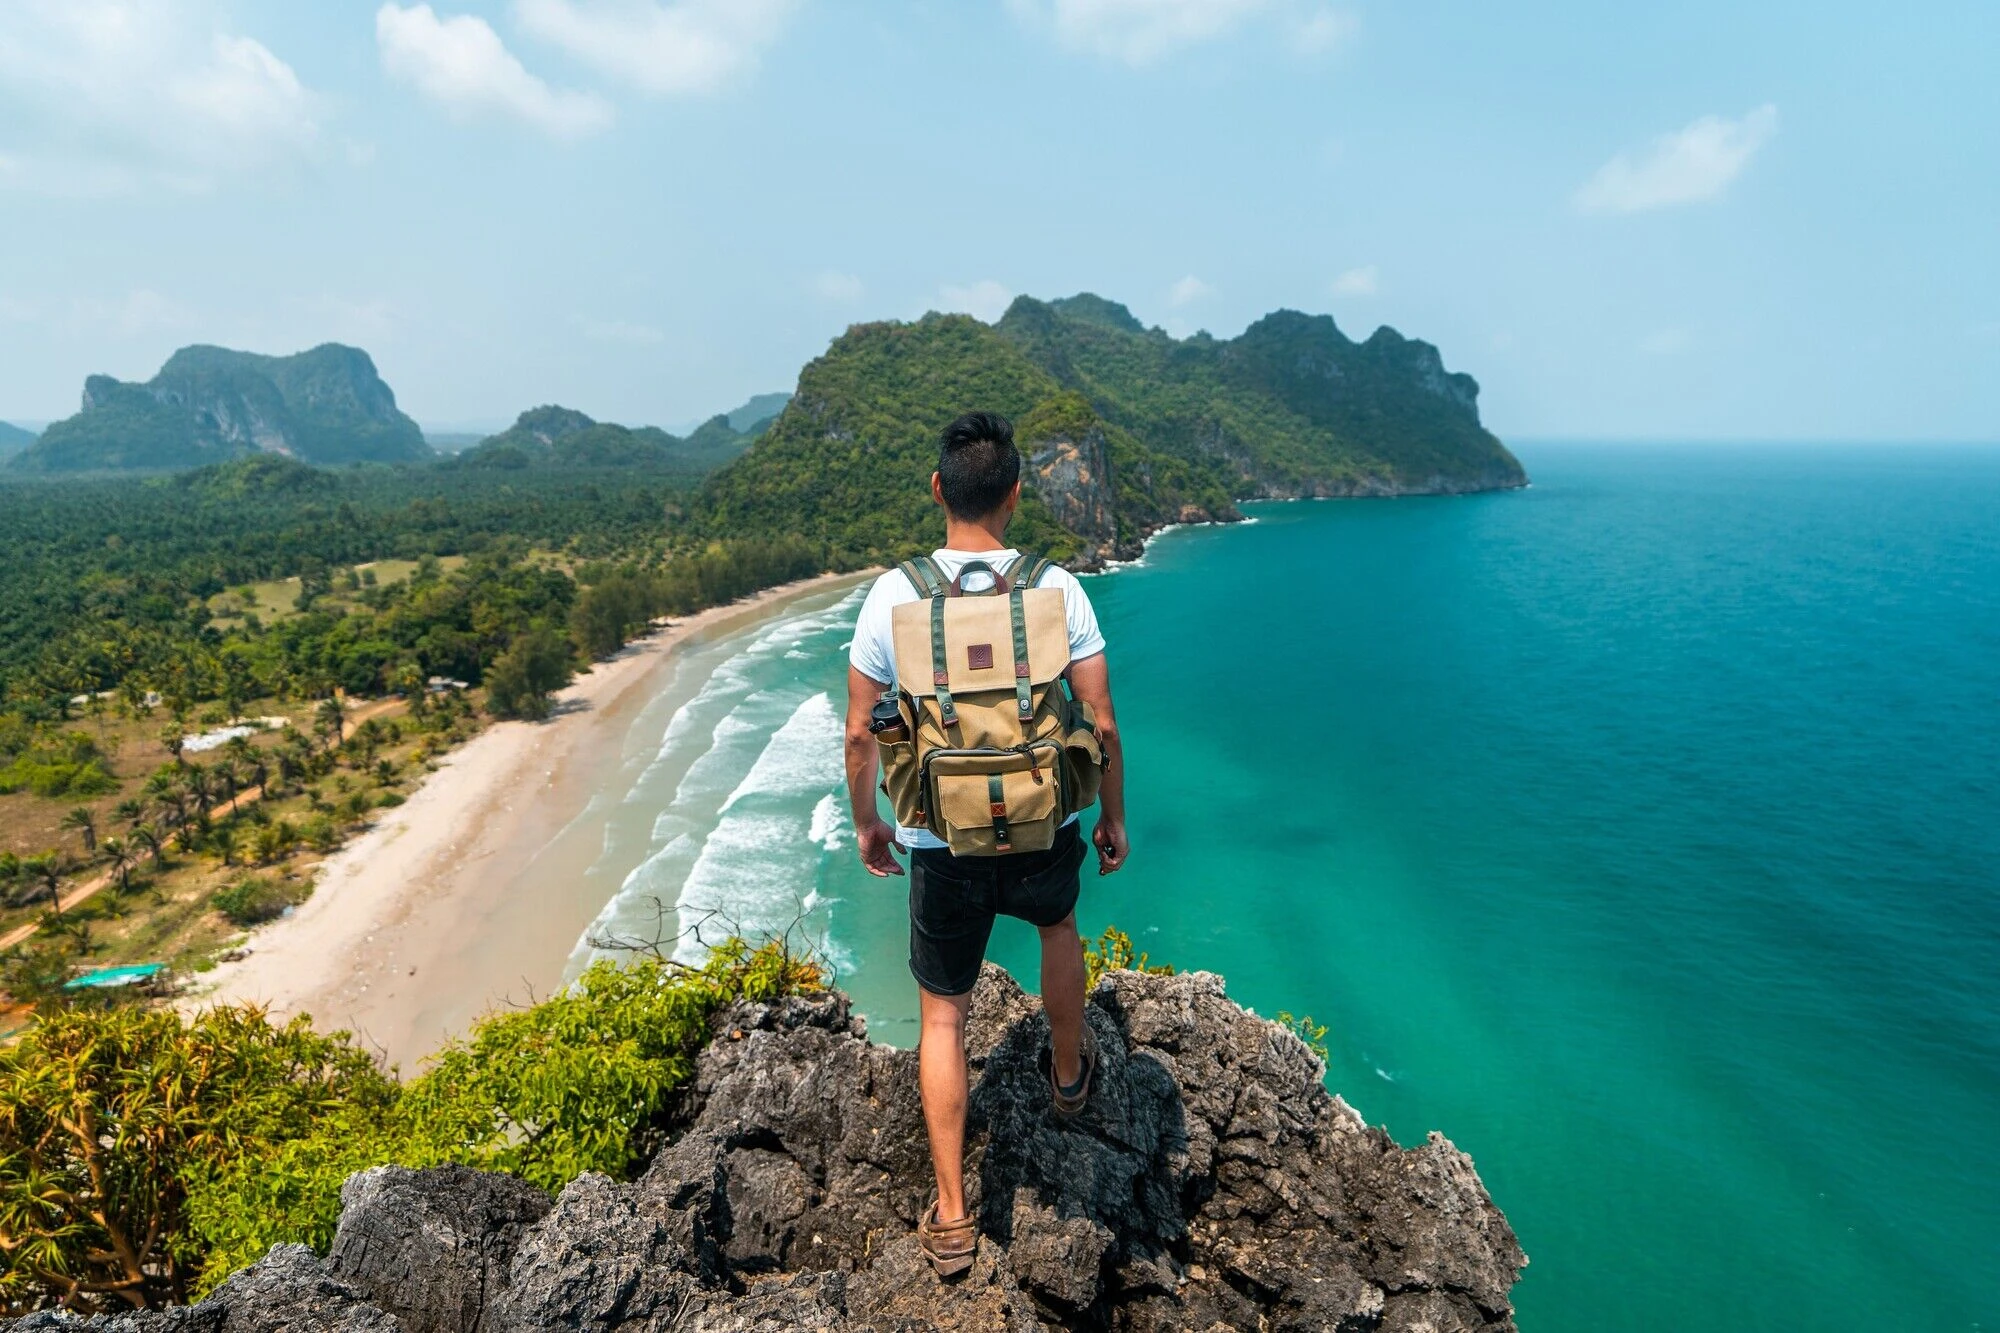 10 Awesome Things to Do in Chumphon for First-Timers - A Complete Guide to Backpacking Chumphon